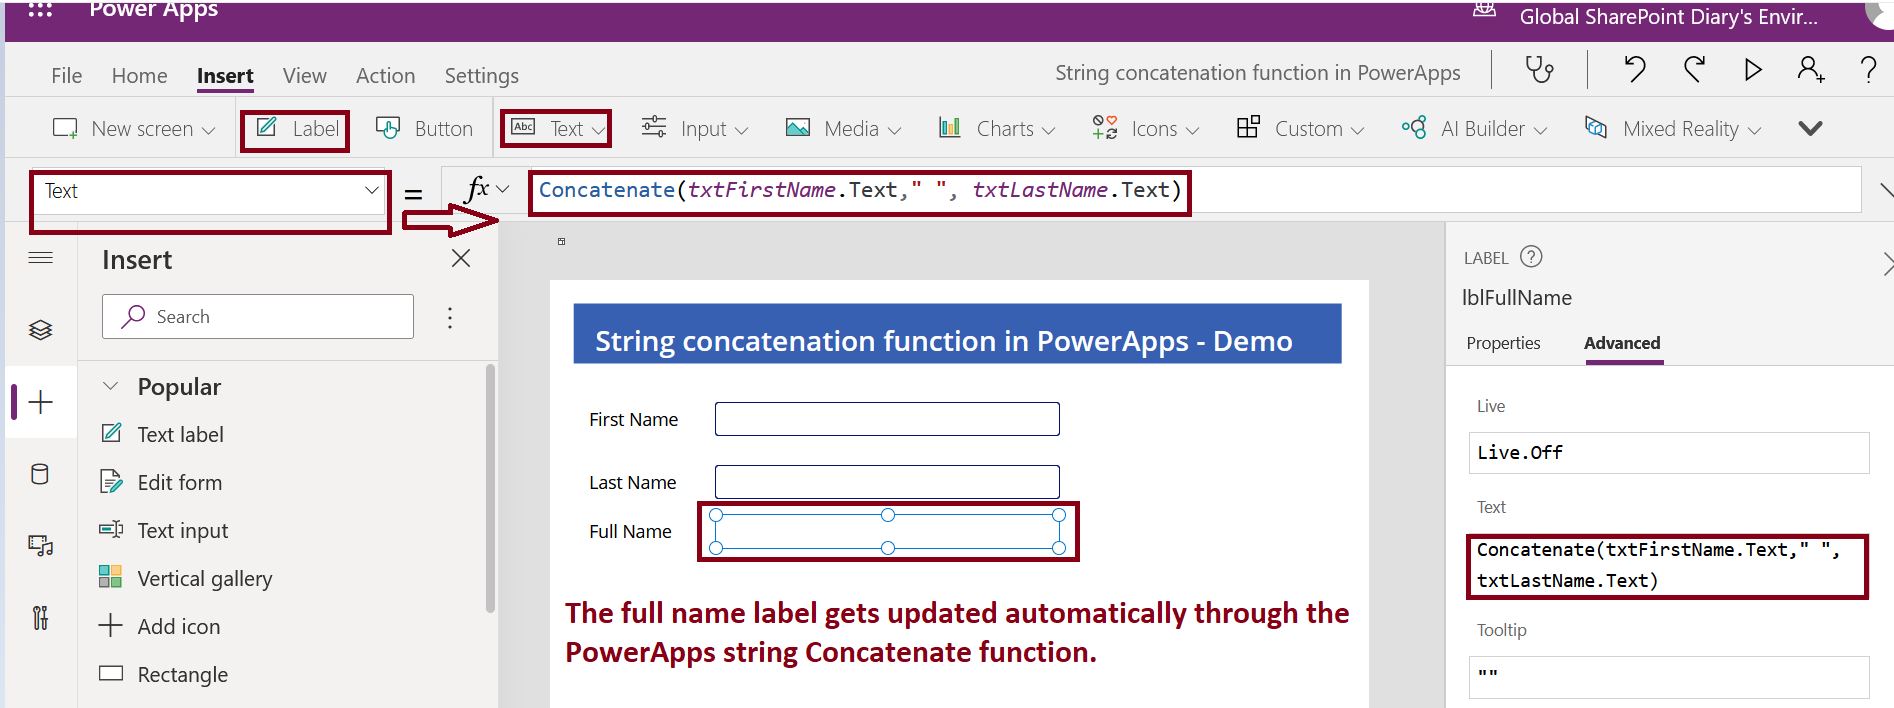 String concatenation function in PowerApps - First Name, Last Name and Full Name